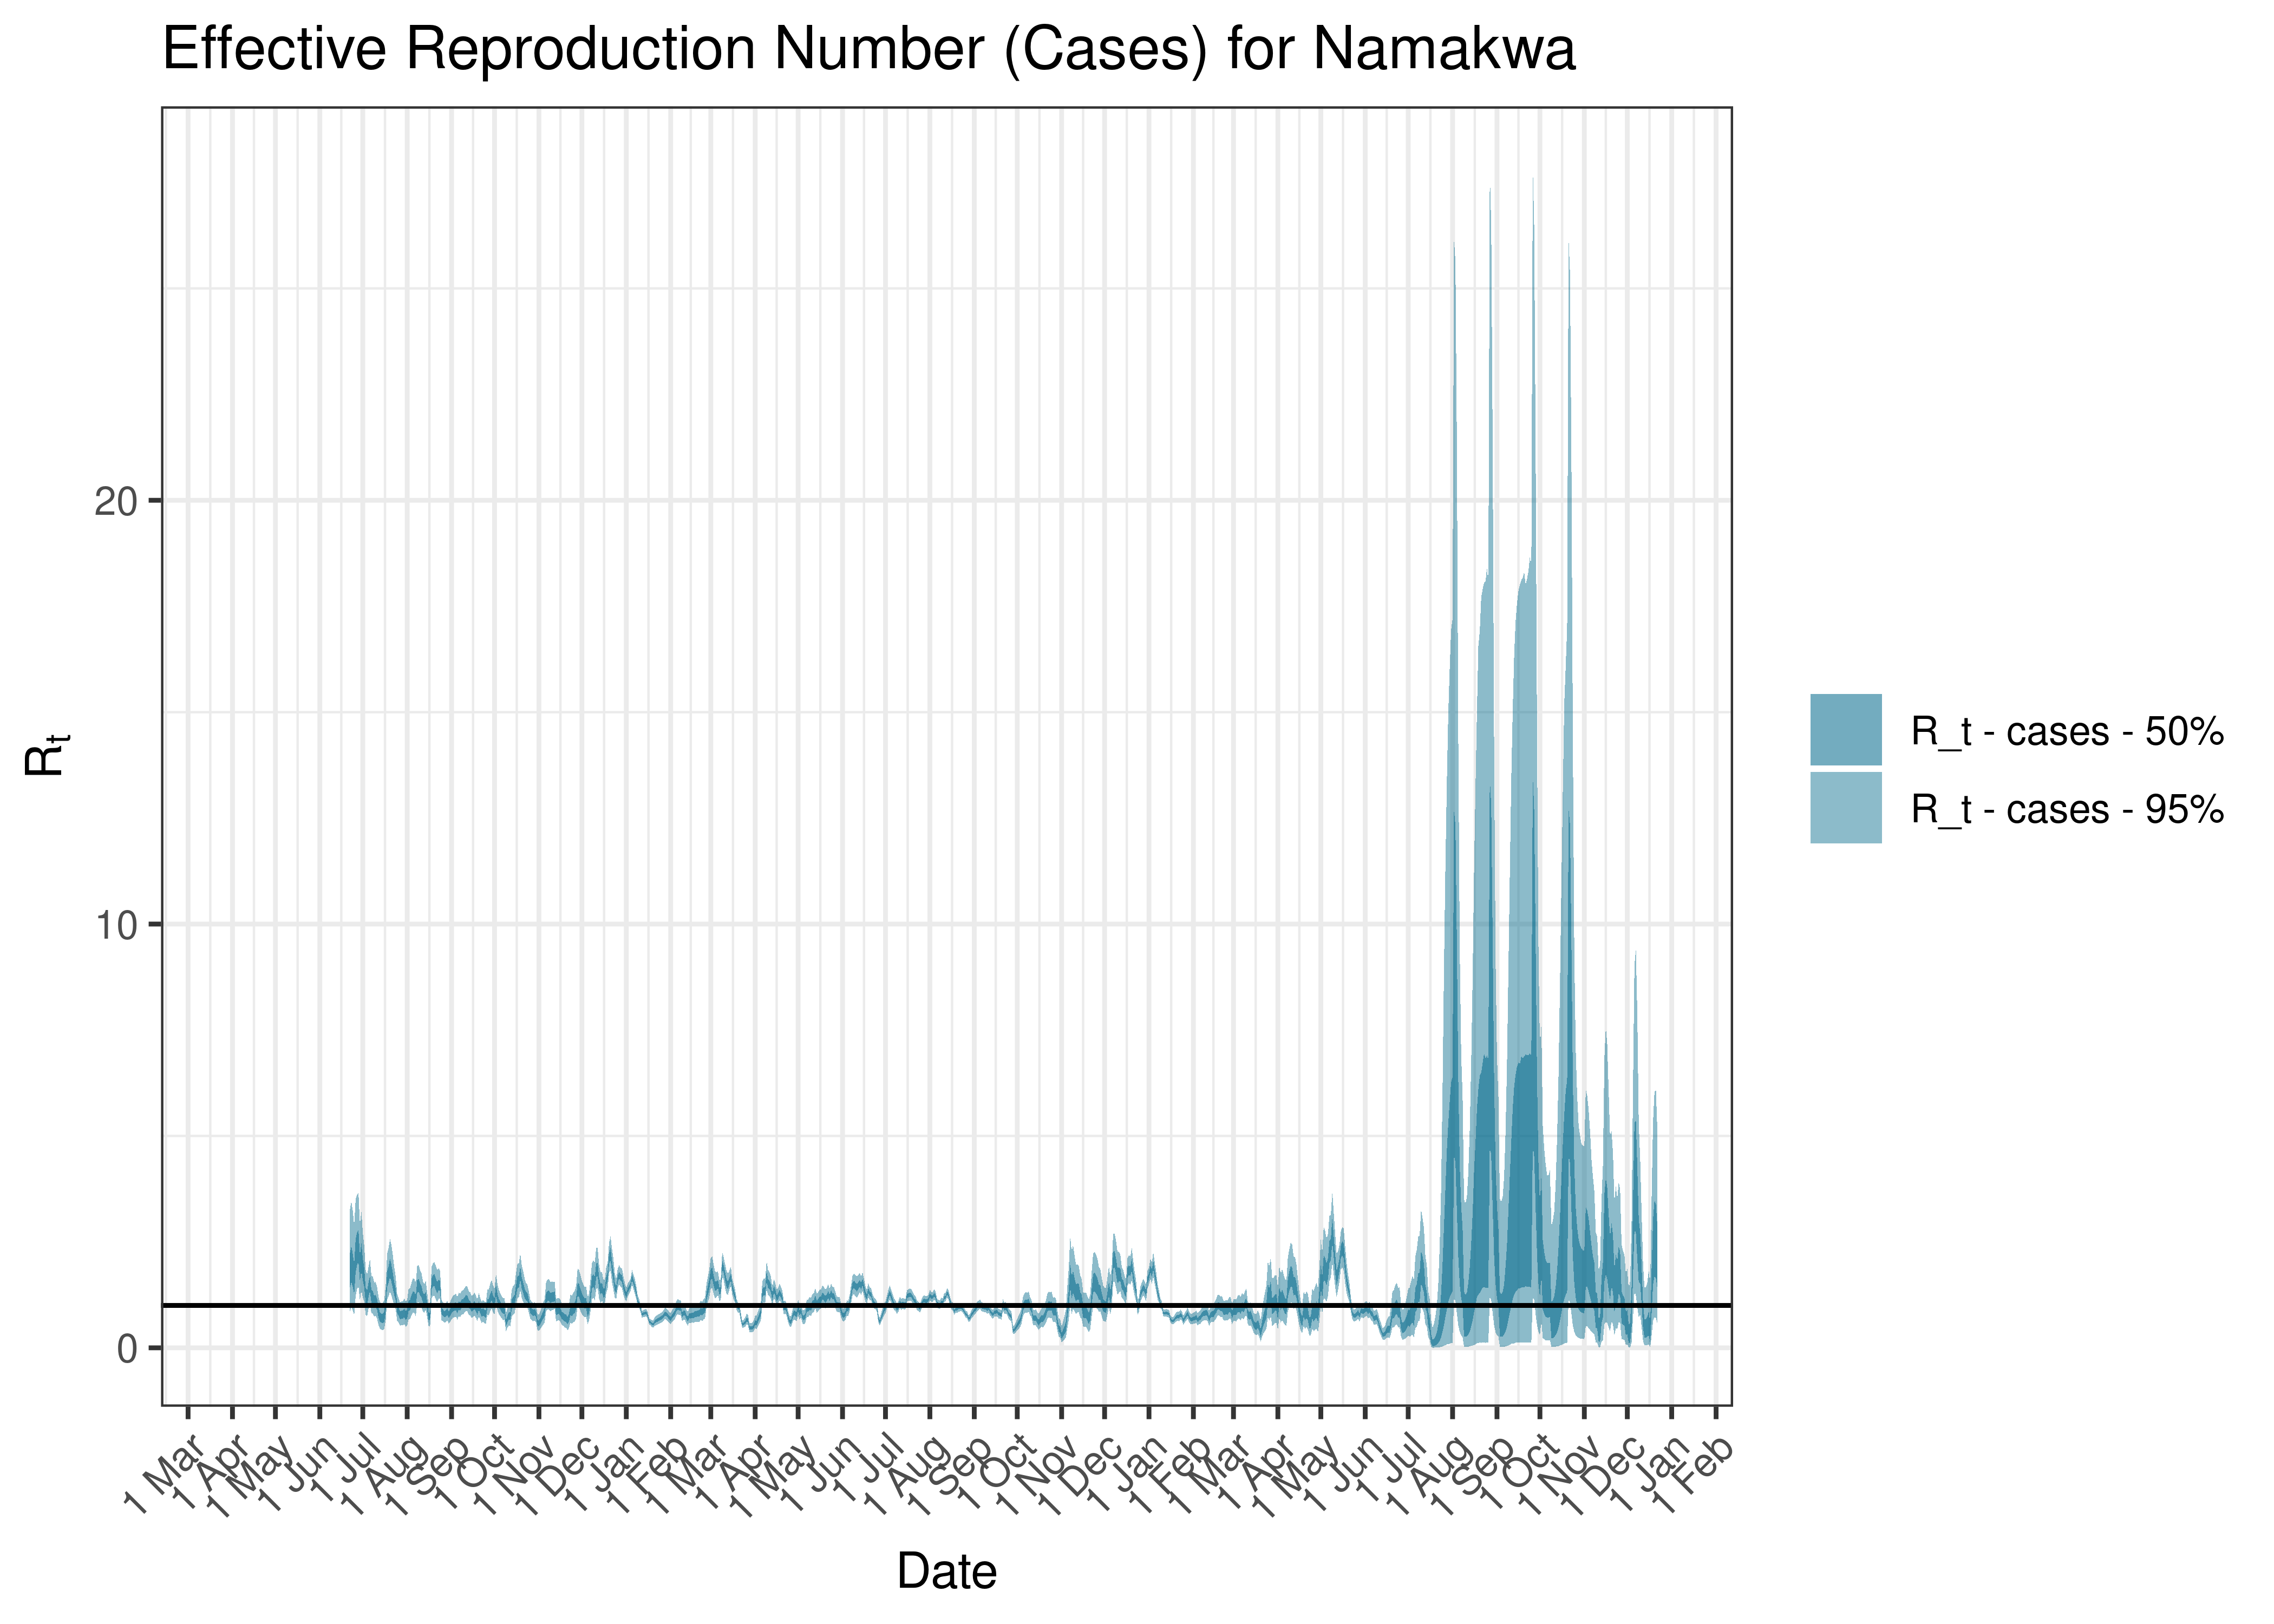 Estimated Effective Reproduction Number Based on Cases for Namakwa since 1 April 2020